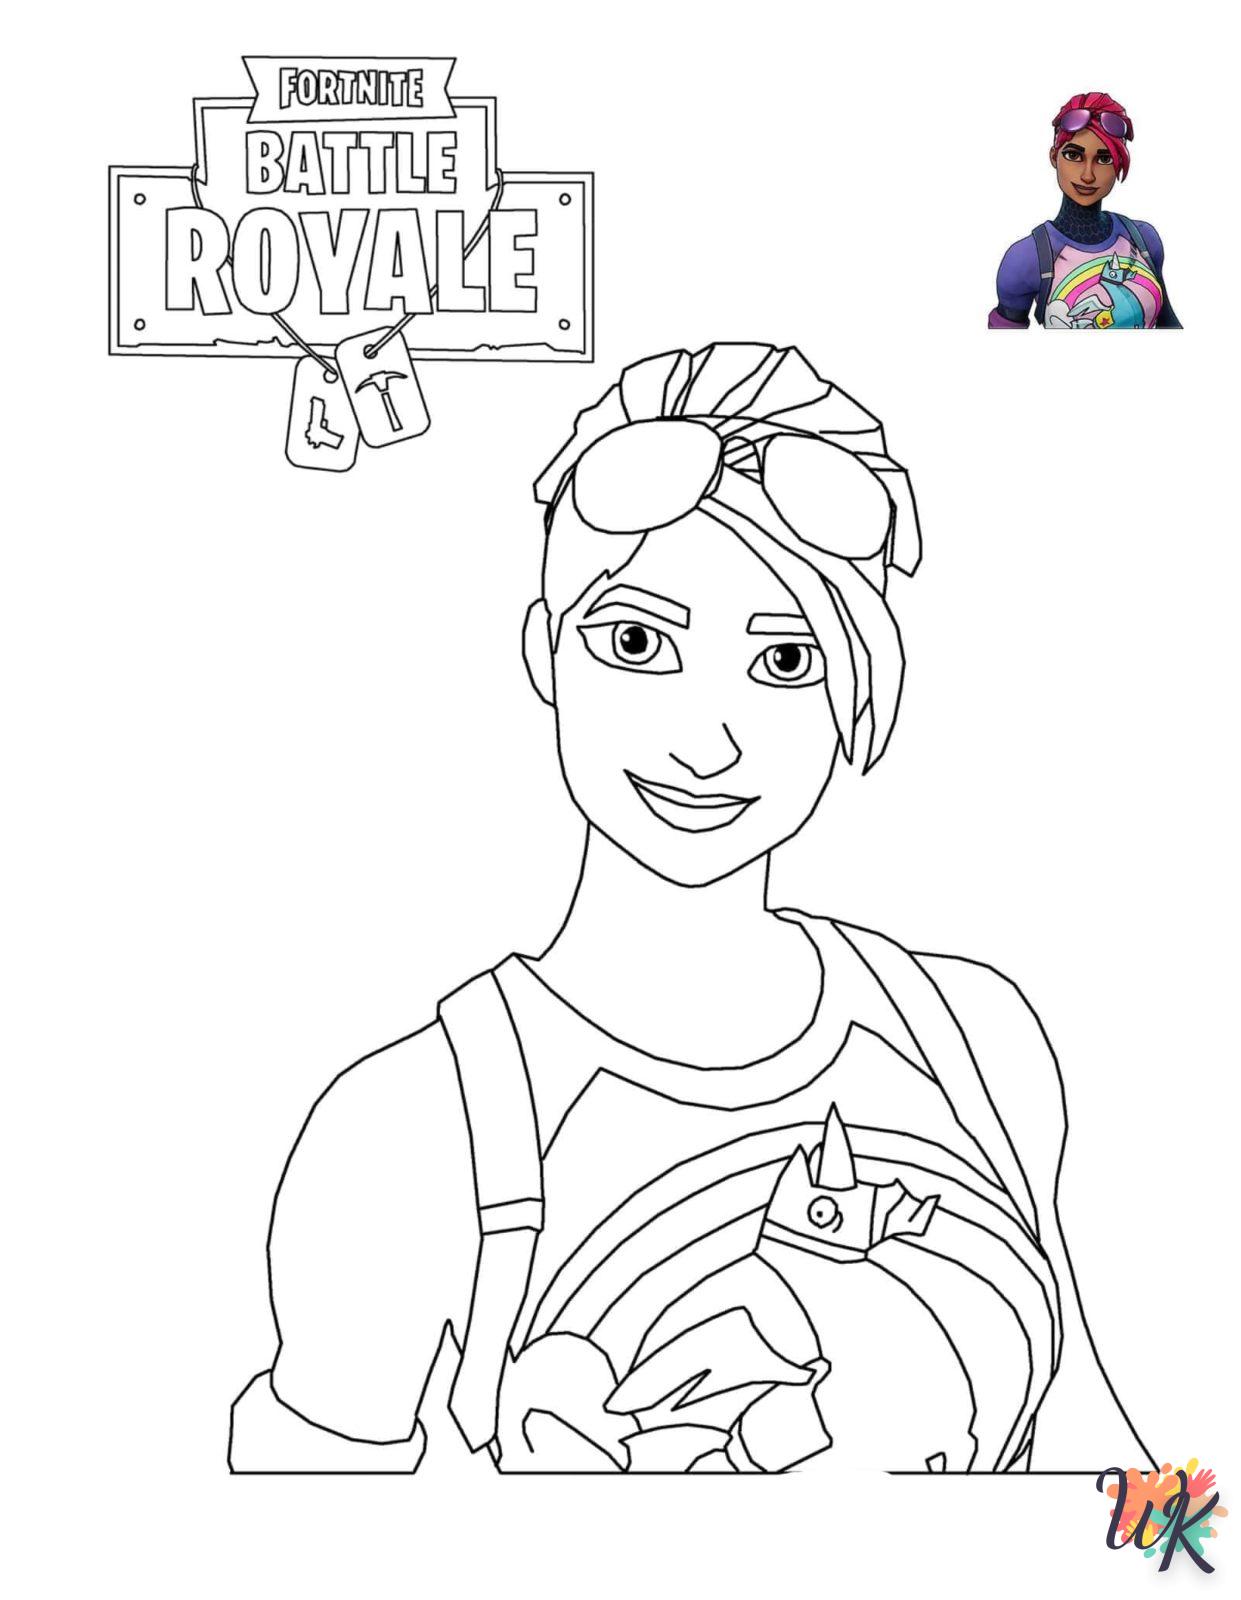 coloring Fortnite  for children to print